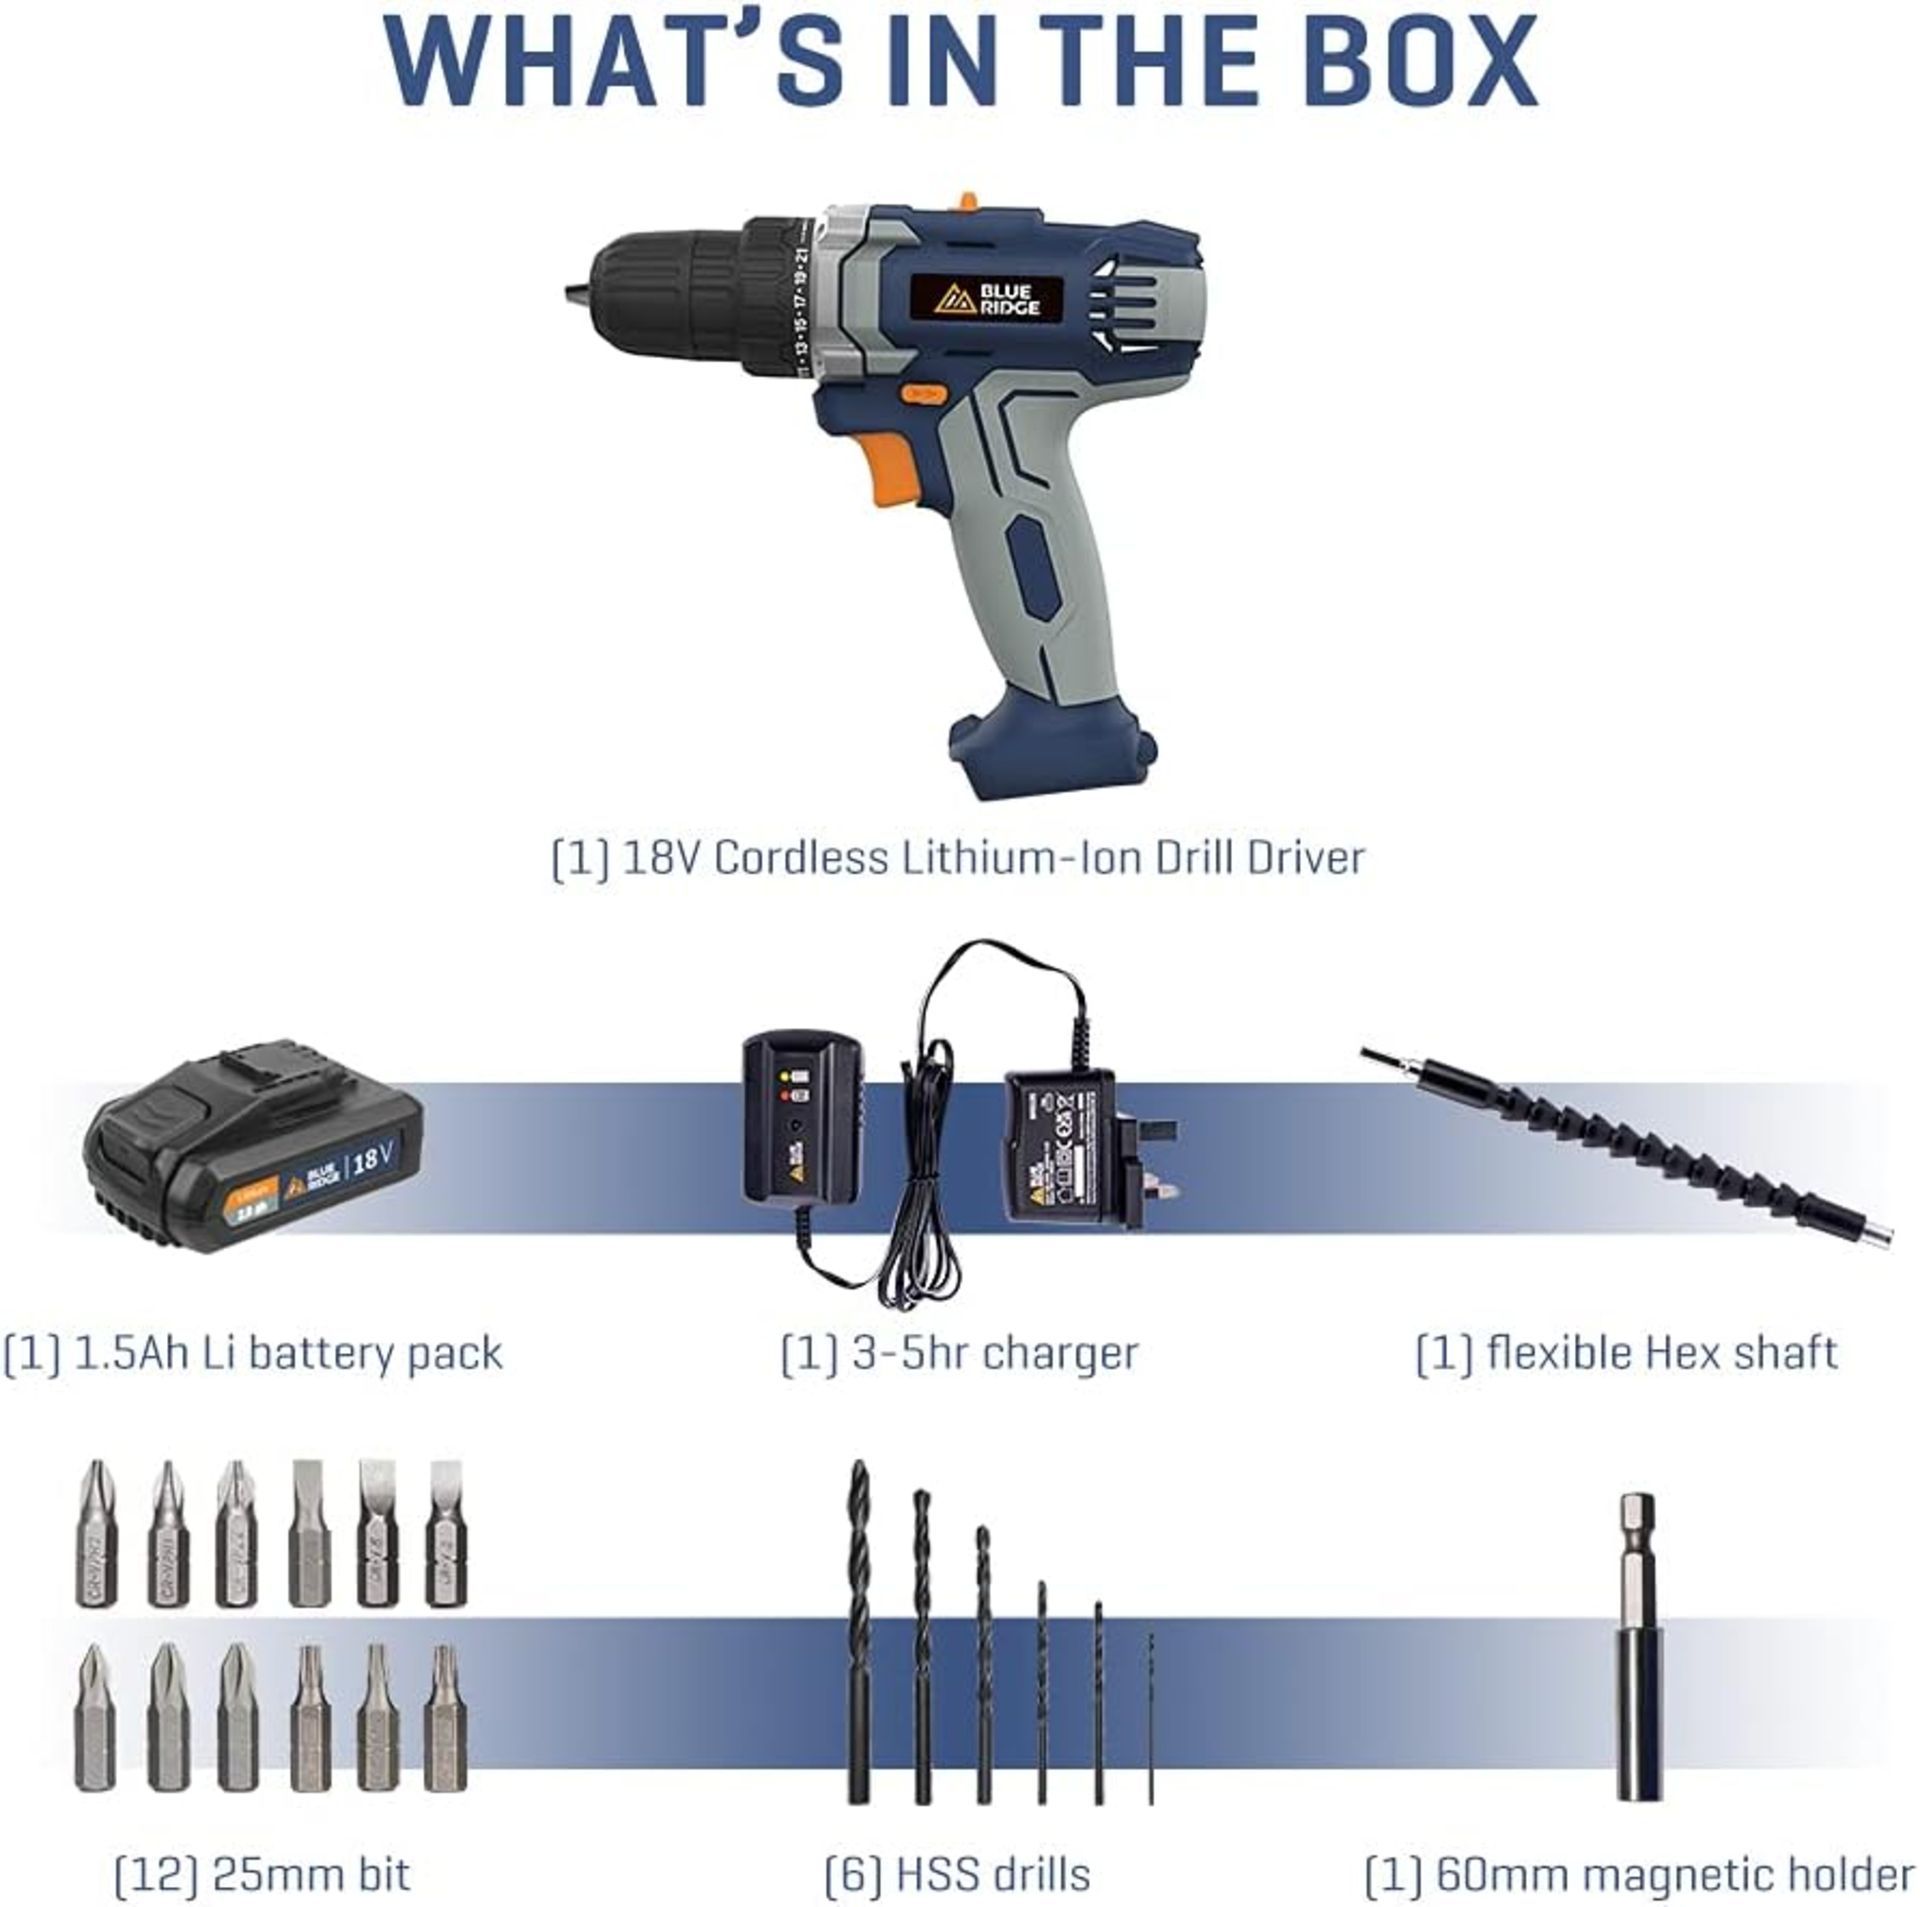 TRADE OT TO CONTAIN 20x NEW & BOXED BLUE RIDGE 18V Cordless Drill Driver. RRP £89 EACH. The - Image 3 of 9